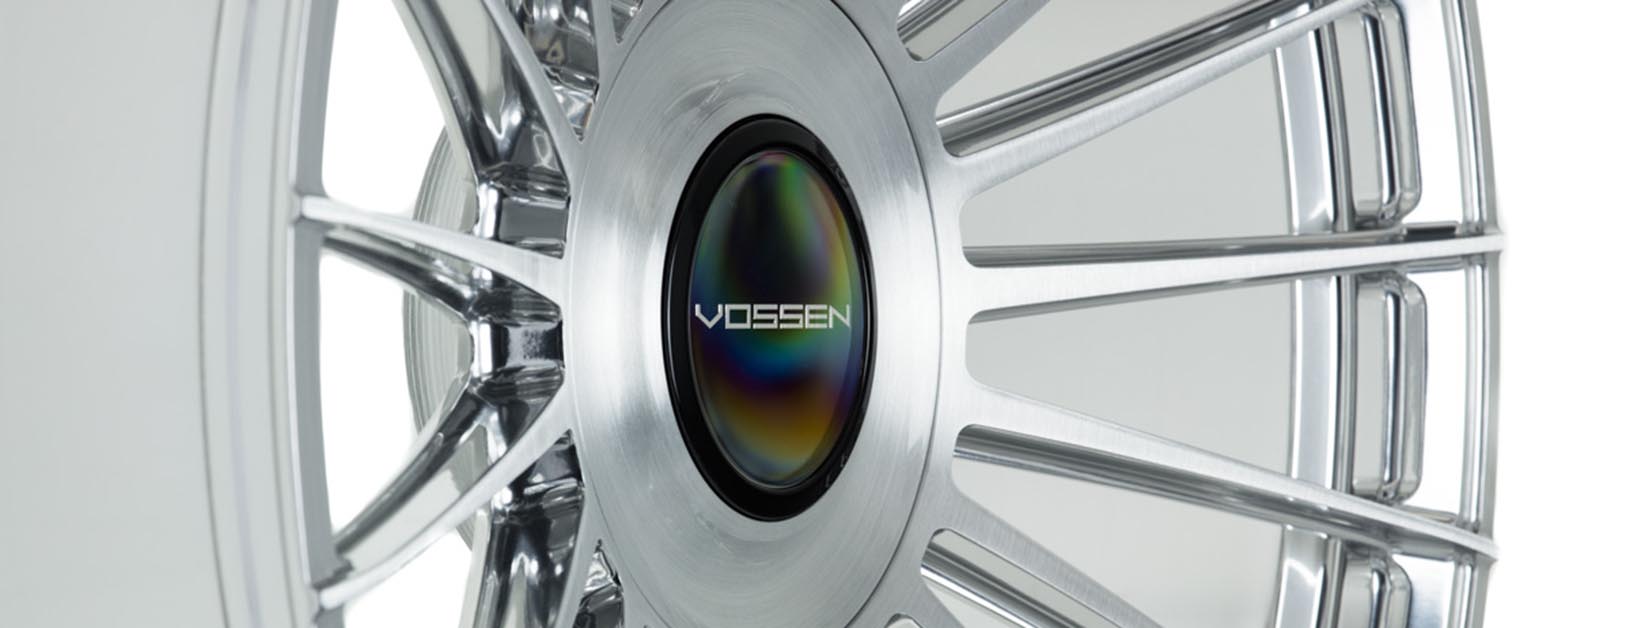 COMING-SOON-Vossen-Forged-S17-13-Wheel-C04-Gloss-Clear-©-Vossen-Wheels-2018-1028-1 (2)